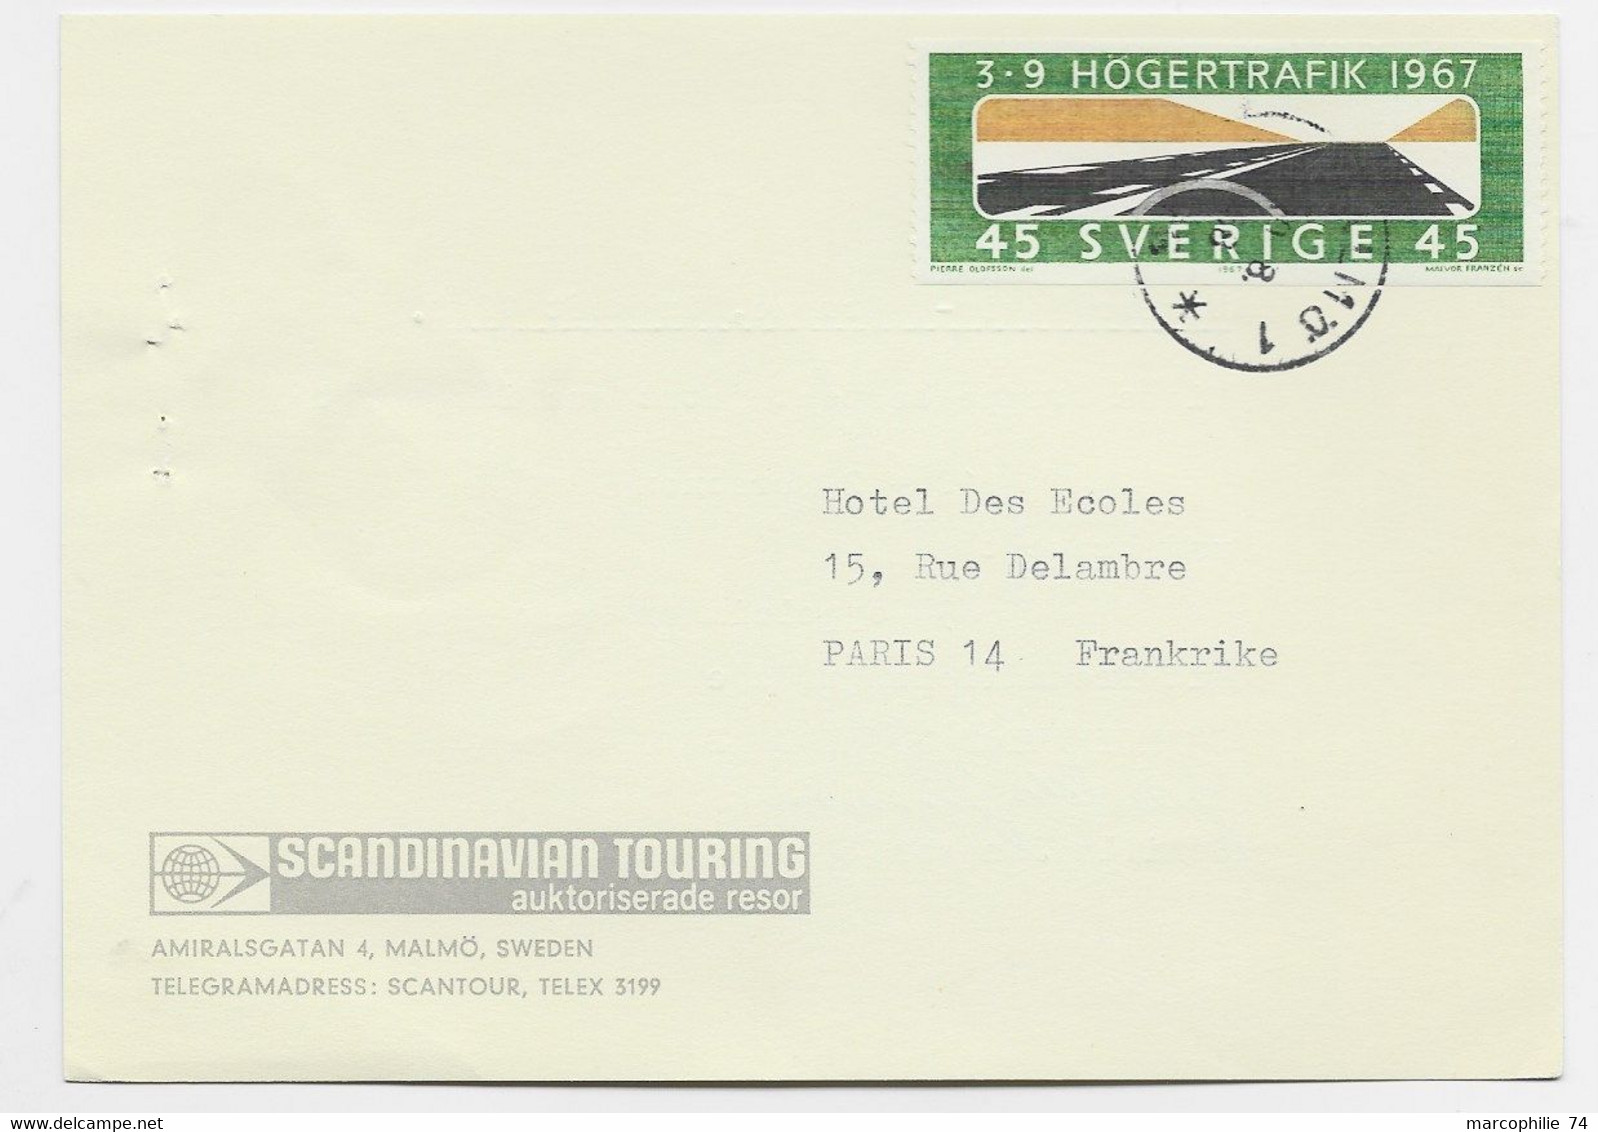 SVERIGE 45 SOLO CARD SCANDINAVIAN TOURING 1967 O FRANCE - Lettres & Documents